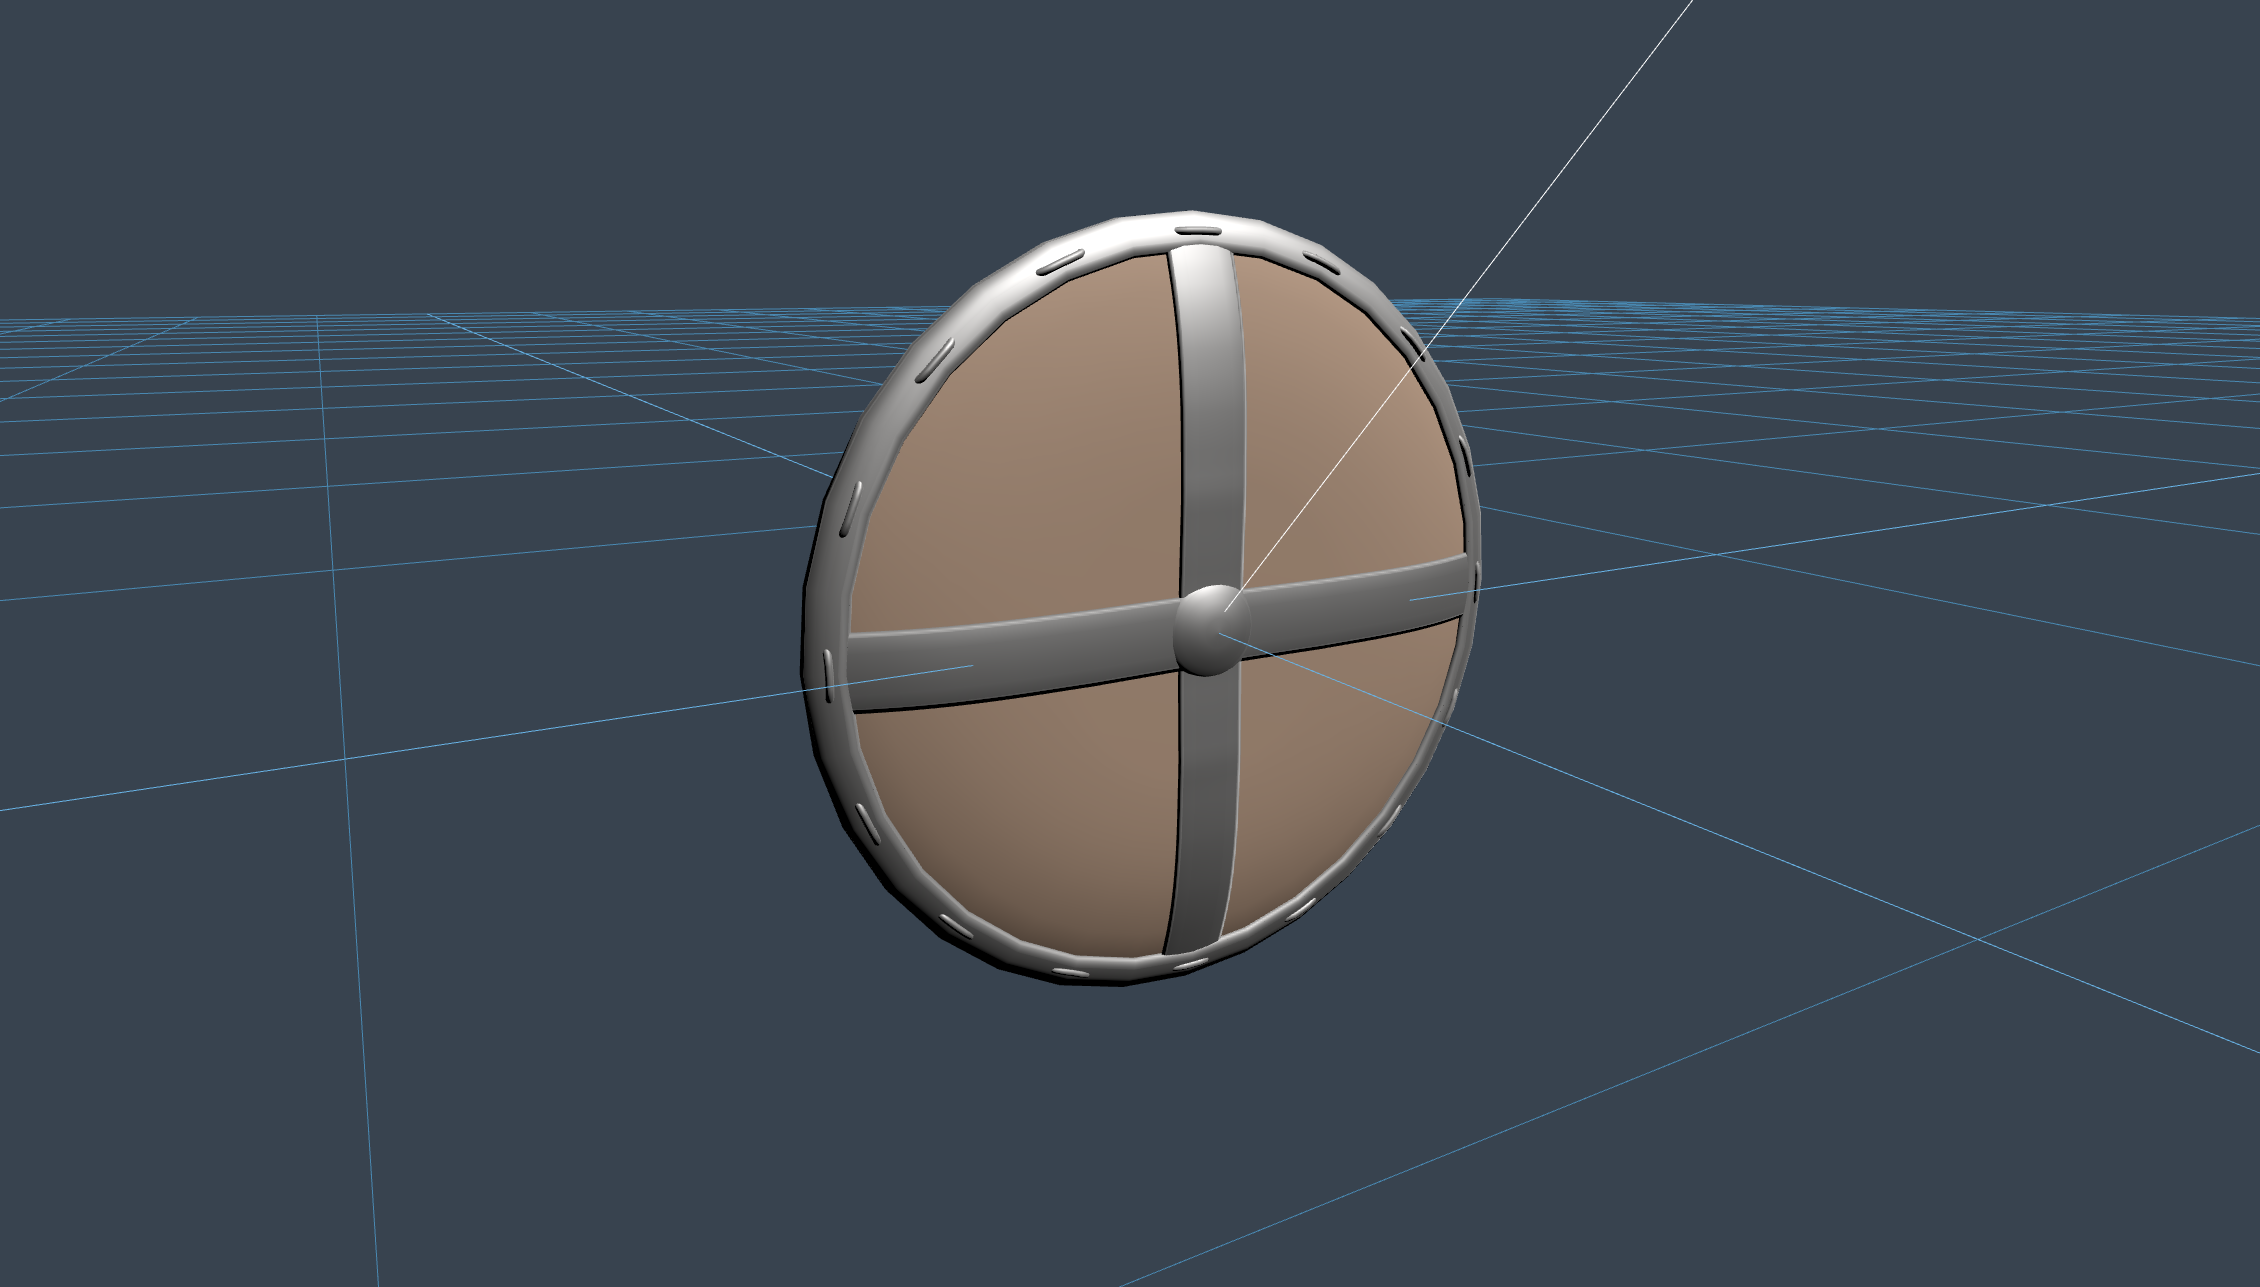 Shield - created by Niilo Korppi with 3D